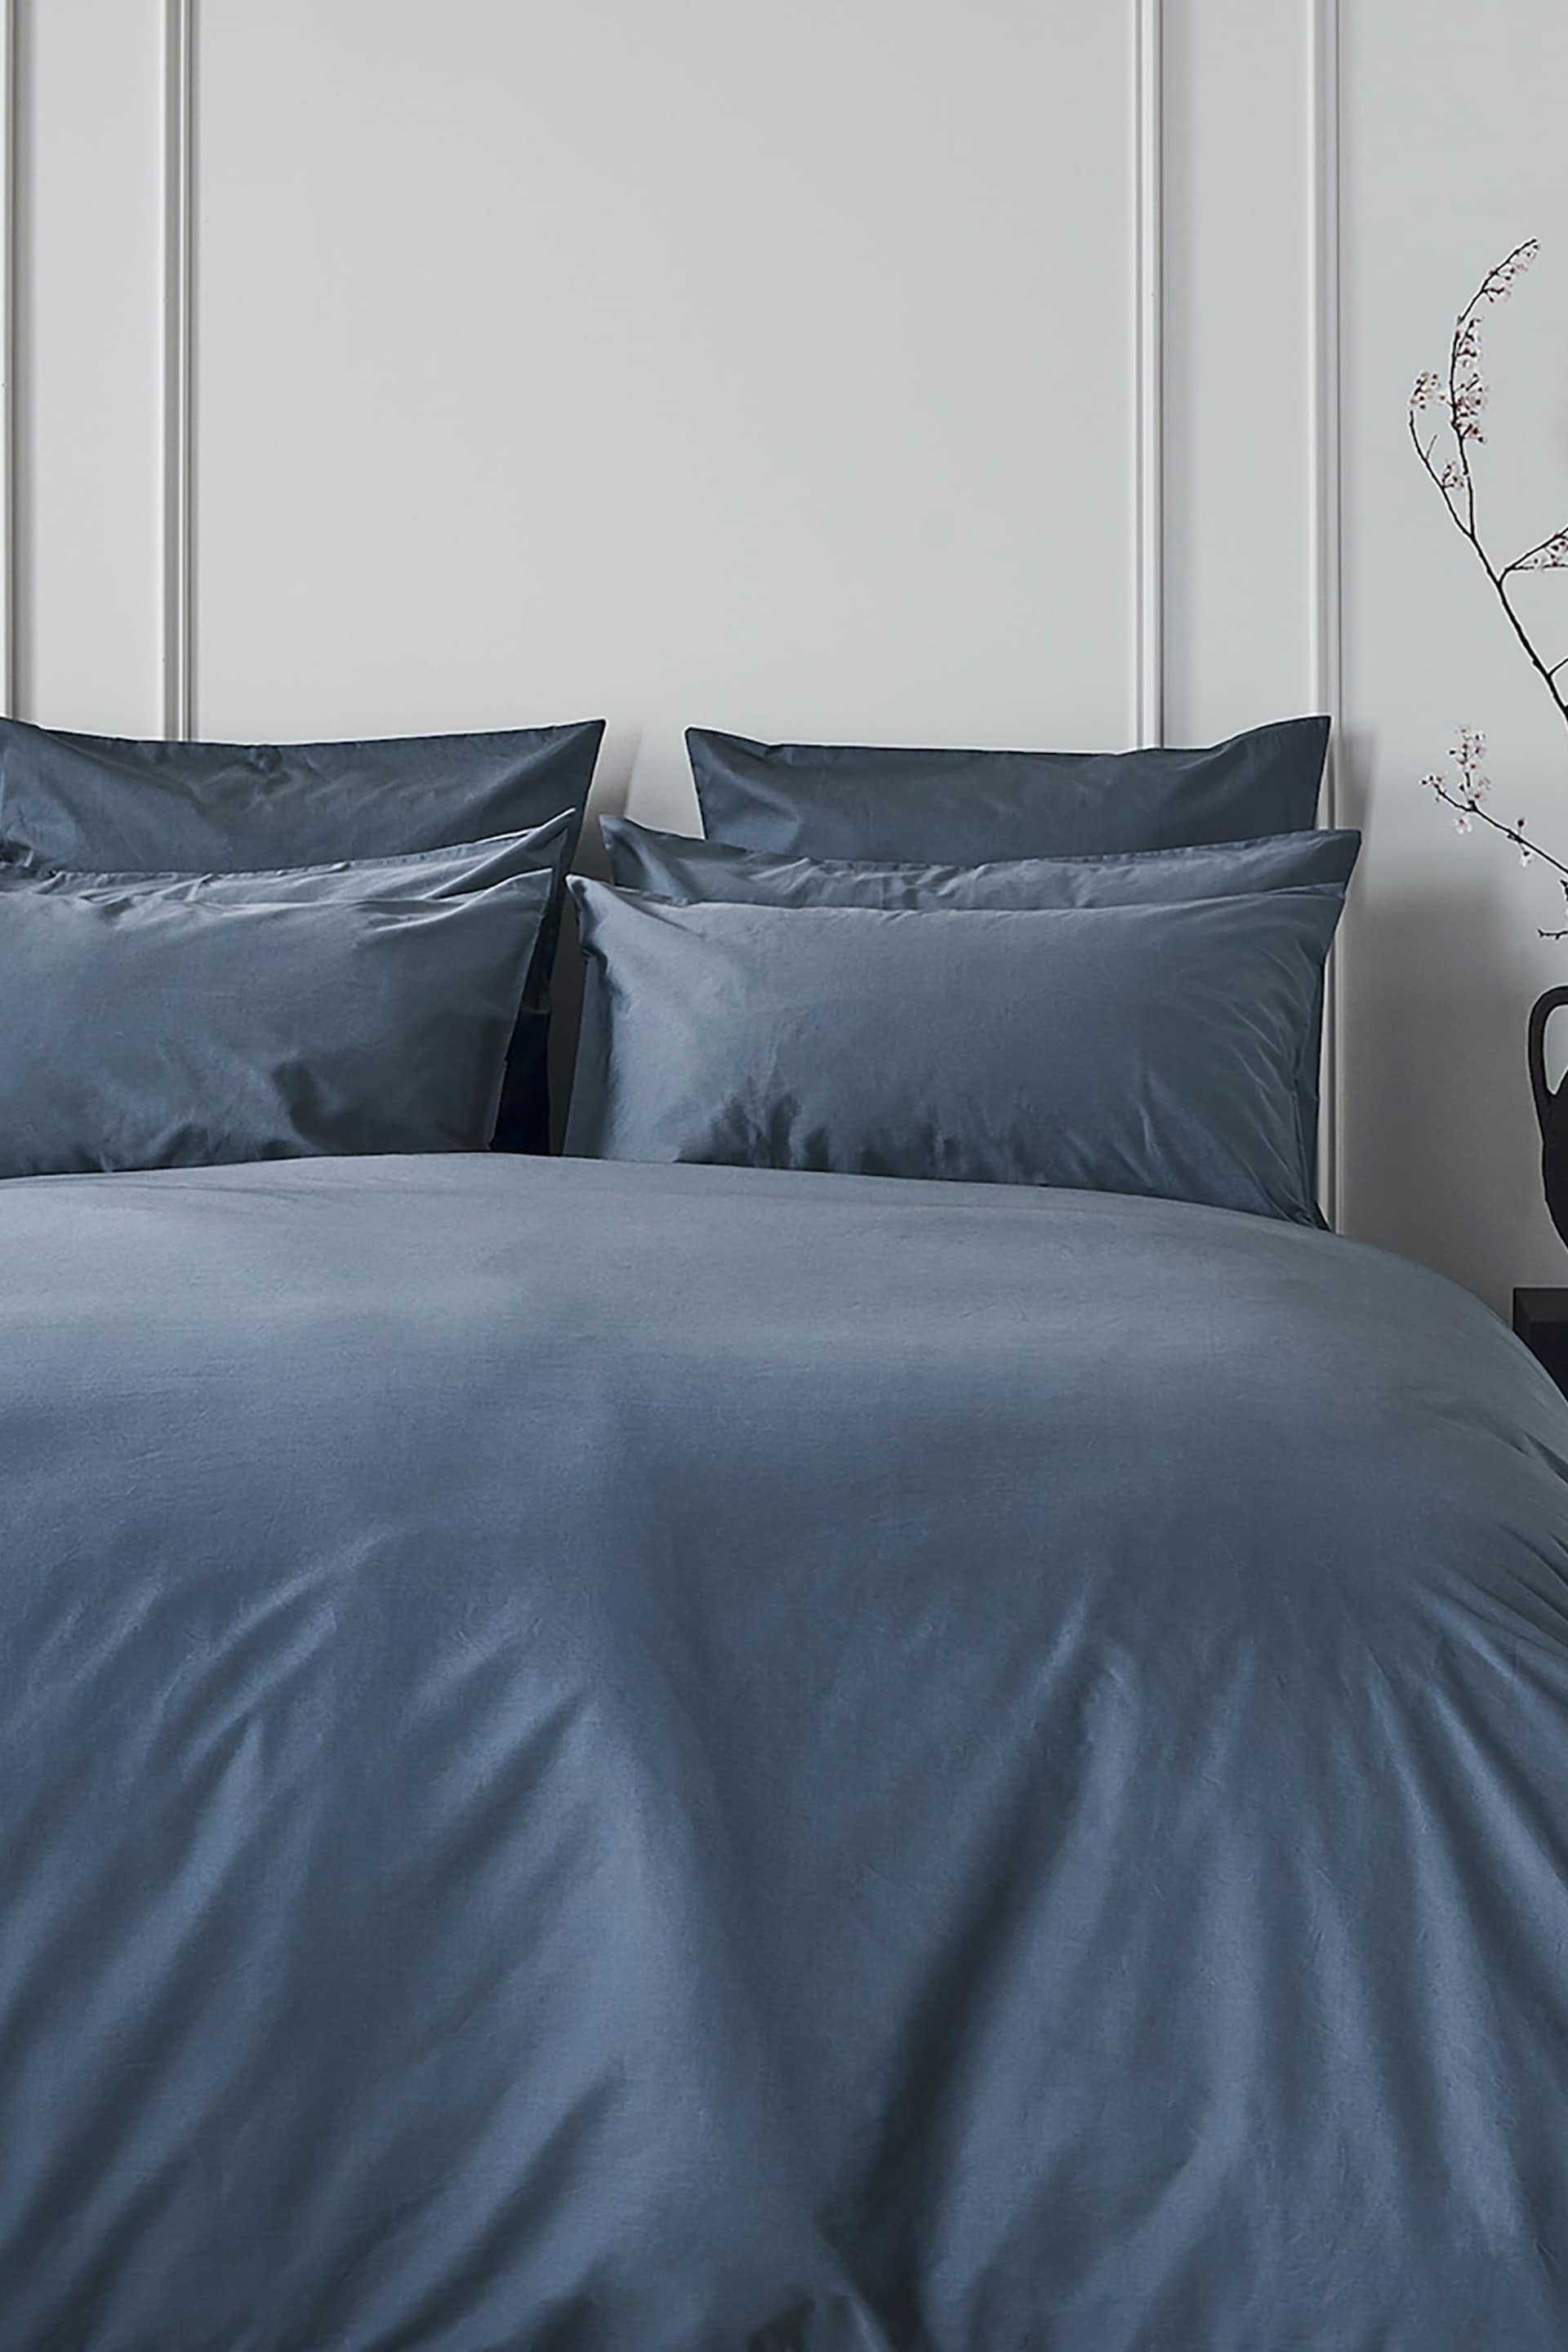 Bedfolk Set of 2 Blue Luxe Cotton Square Pillowcases - Image 2 of 3